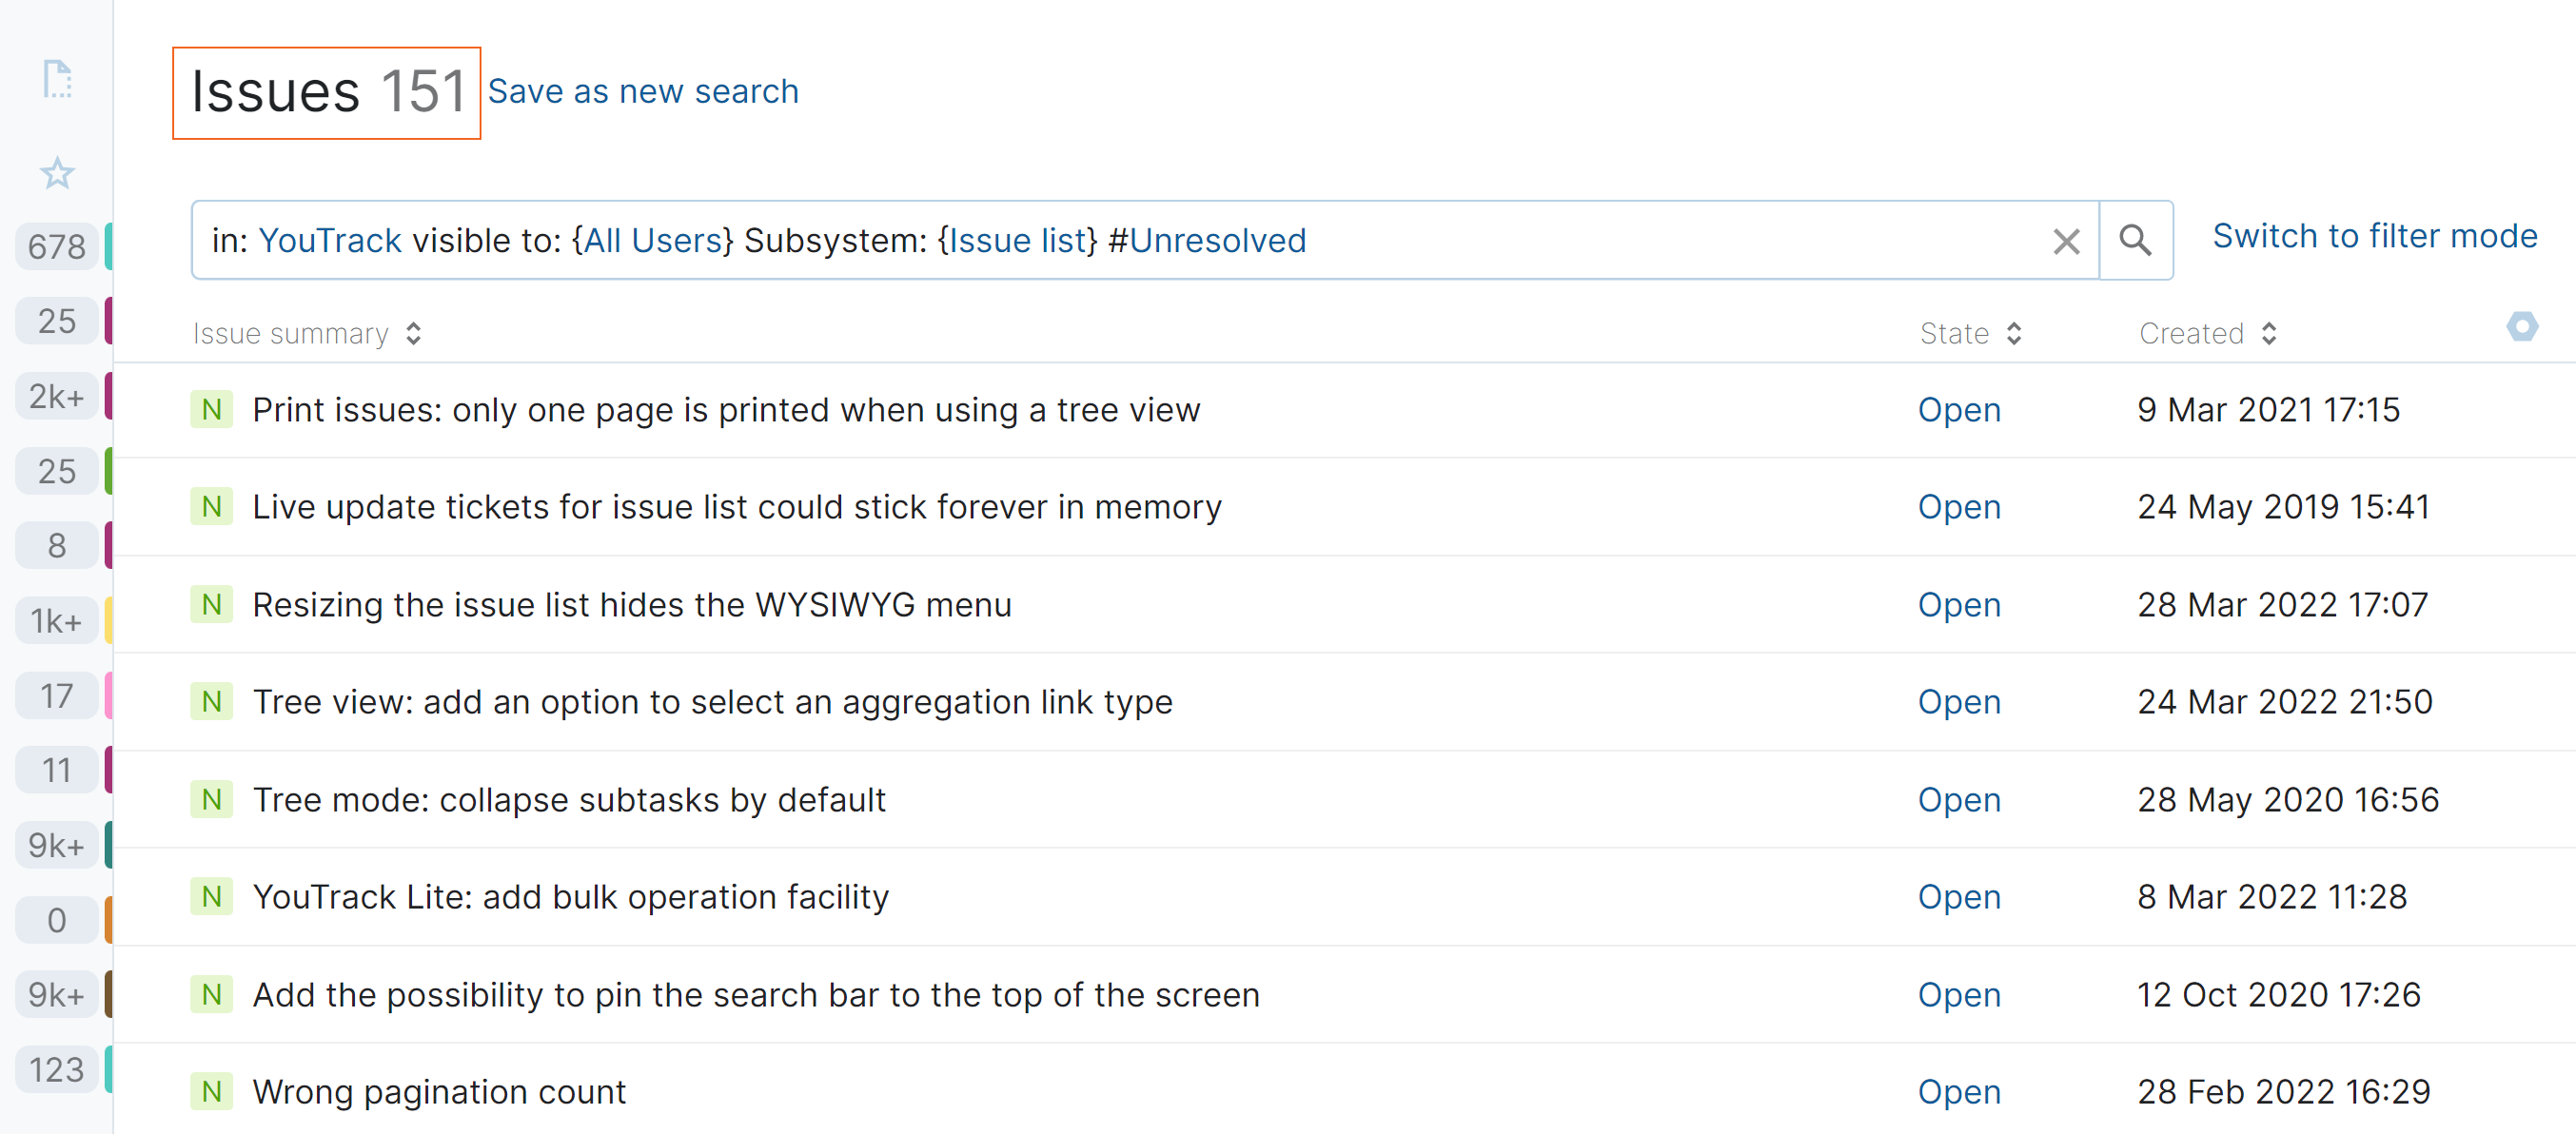 number of issues that match the current search query